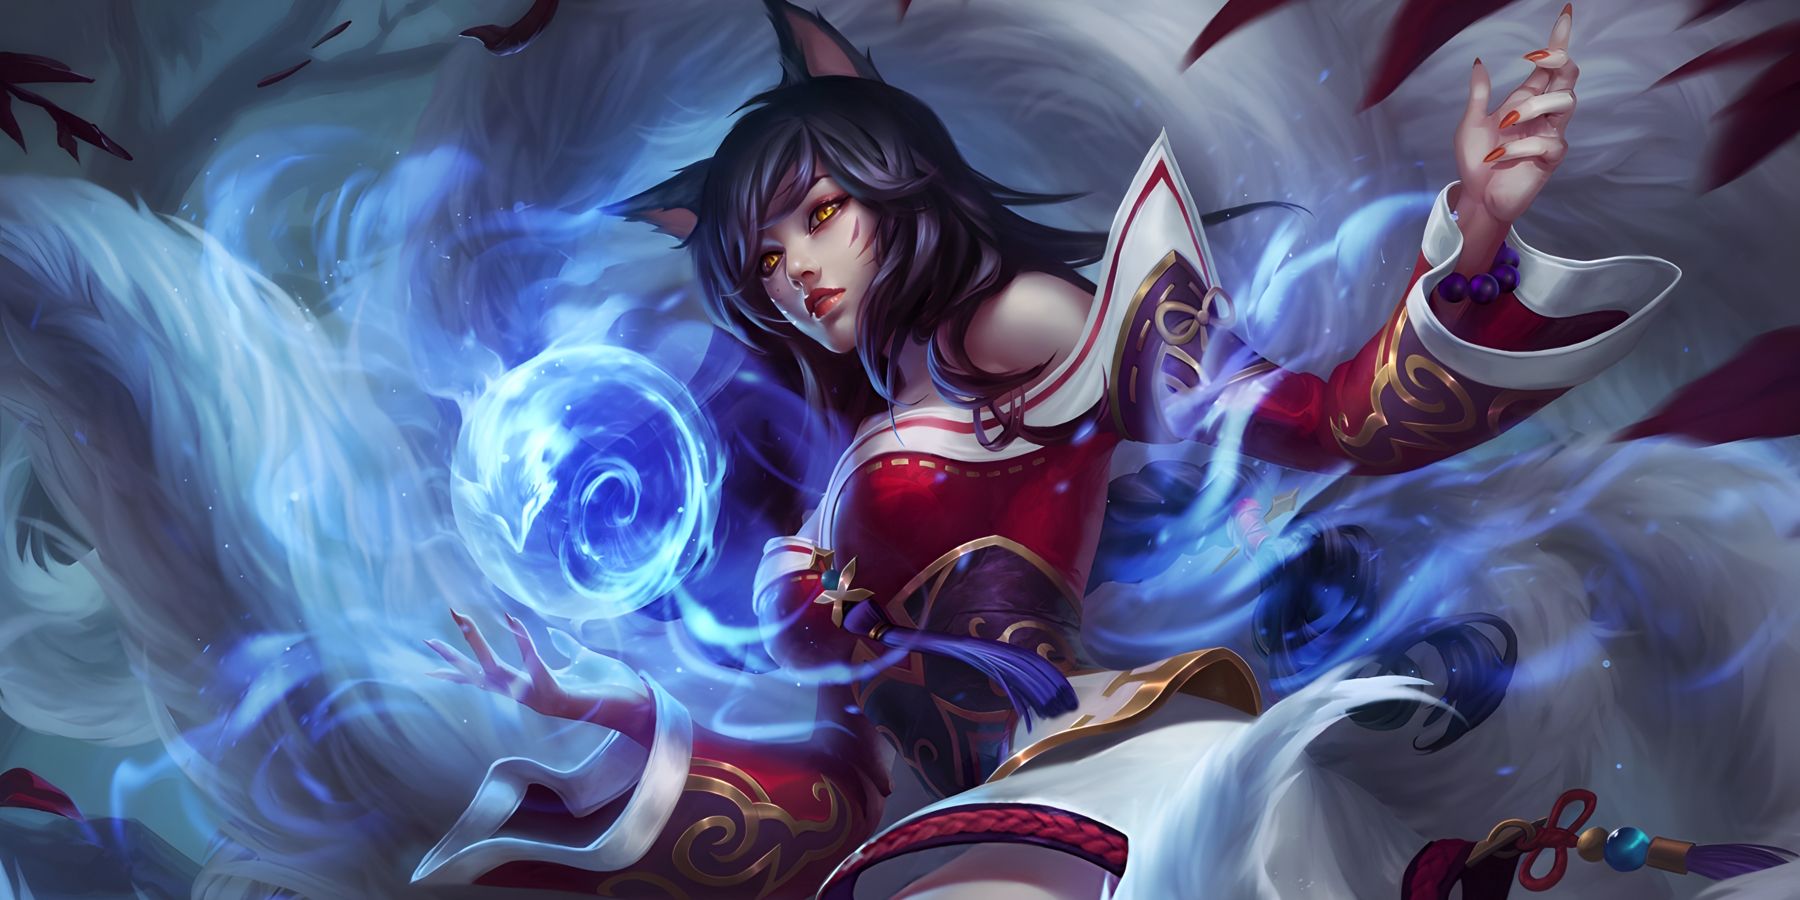 Promotional art of Ahri from League of Legends